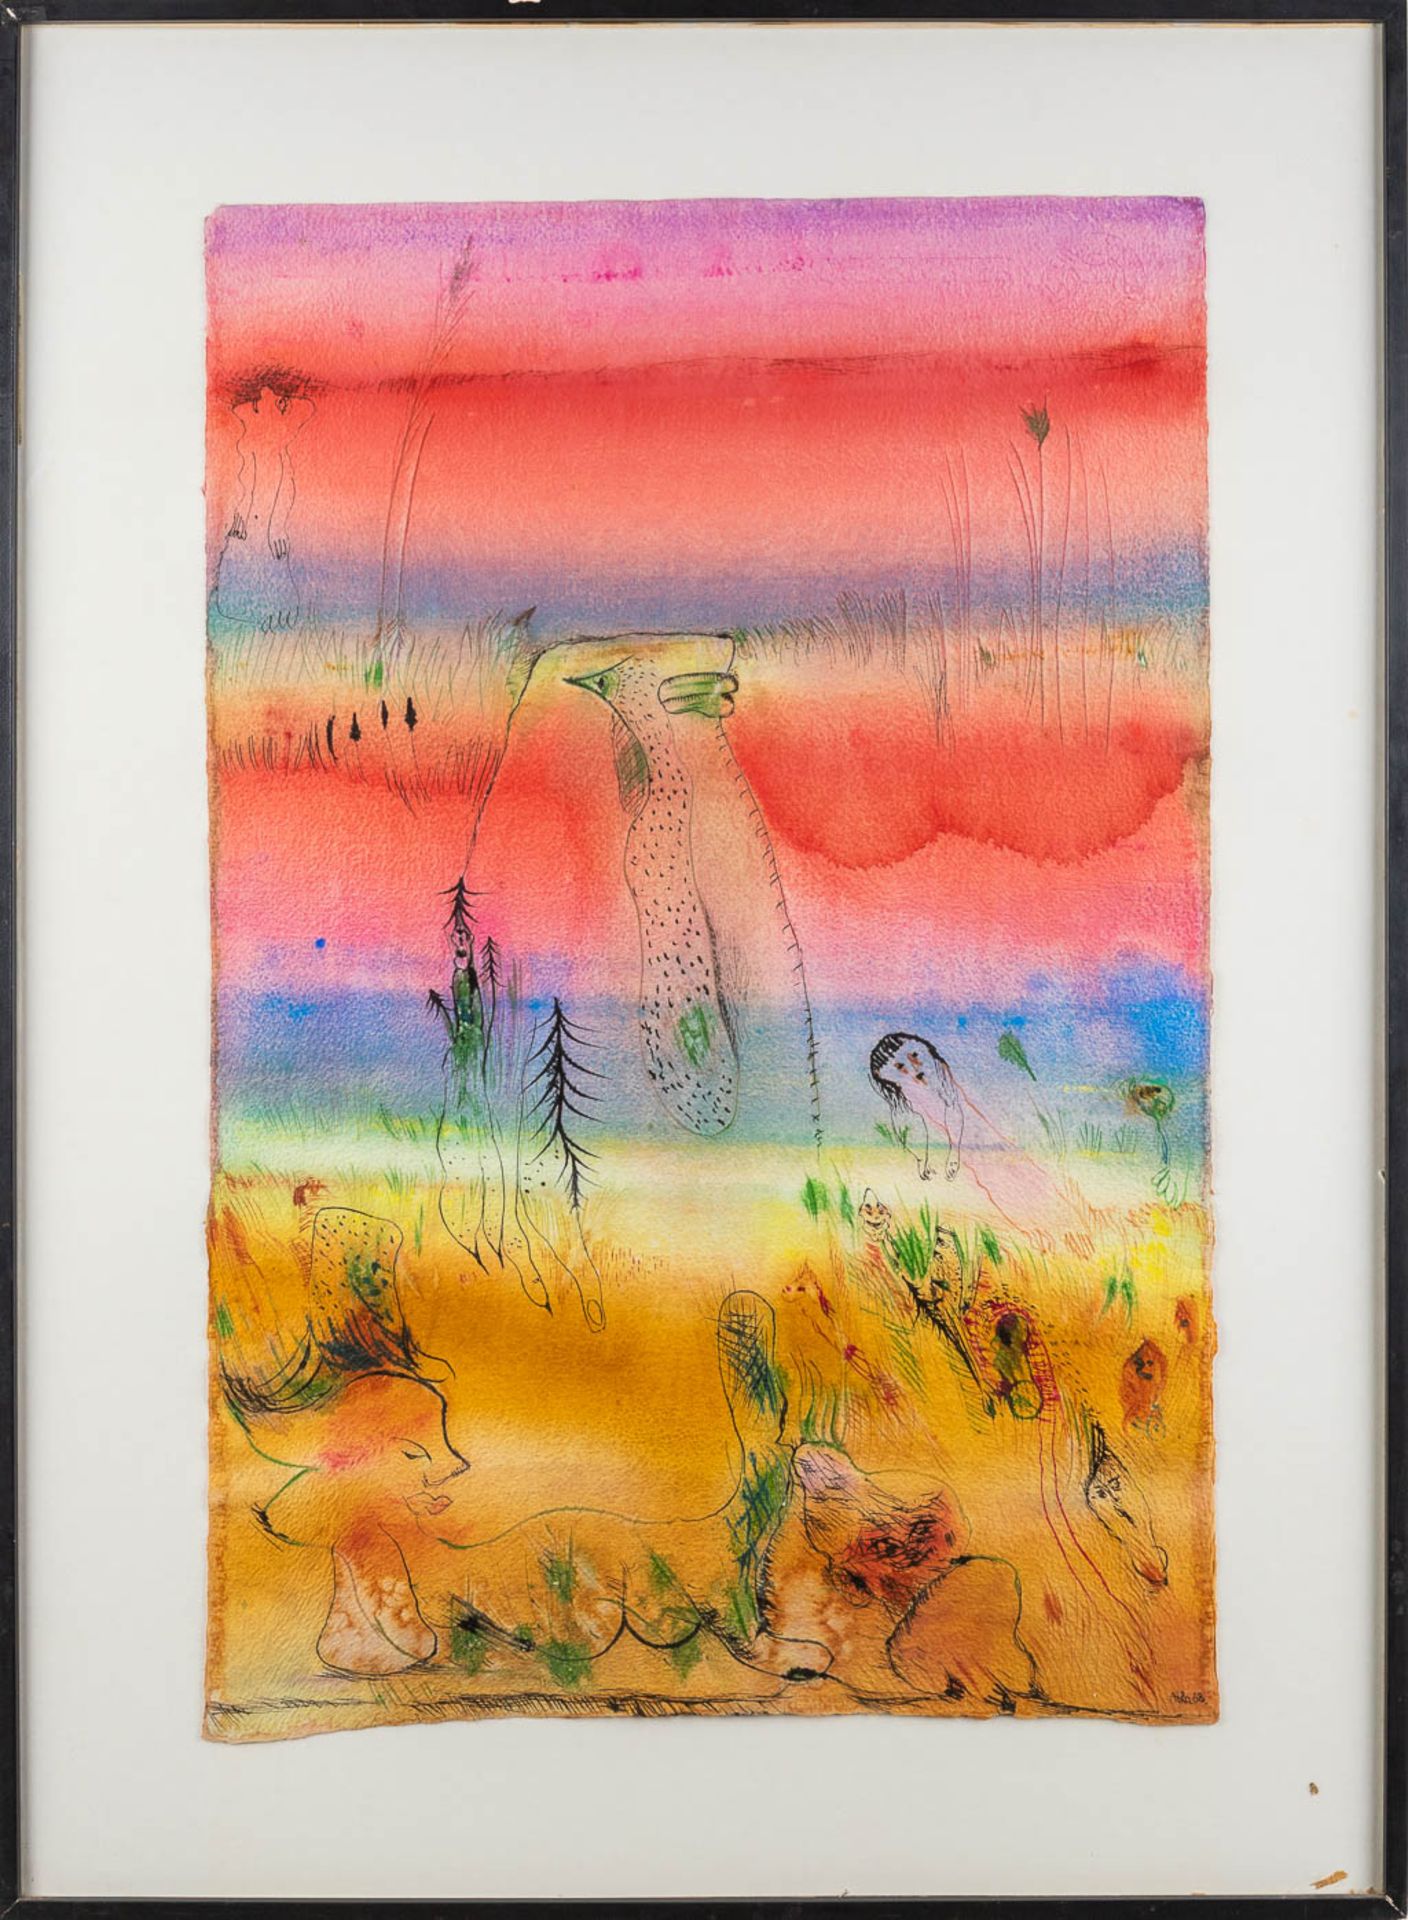 ATILA (1931-1987) 'Abstract' watercolor and pencil on paper. 1968 (W:60 x H:90 cm) - Image 3 of 7